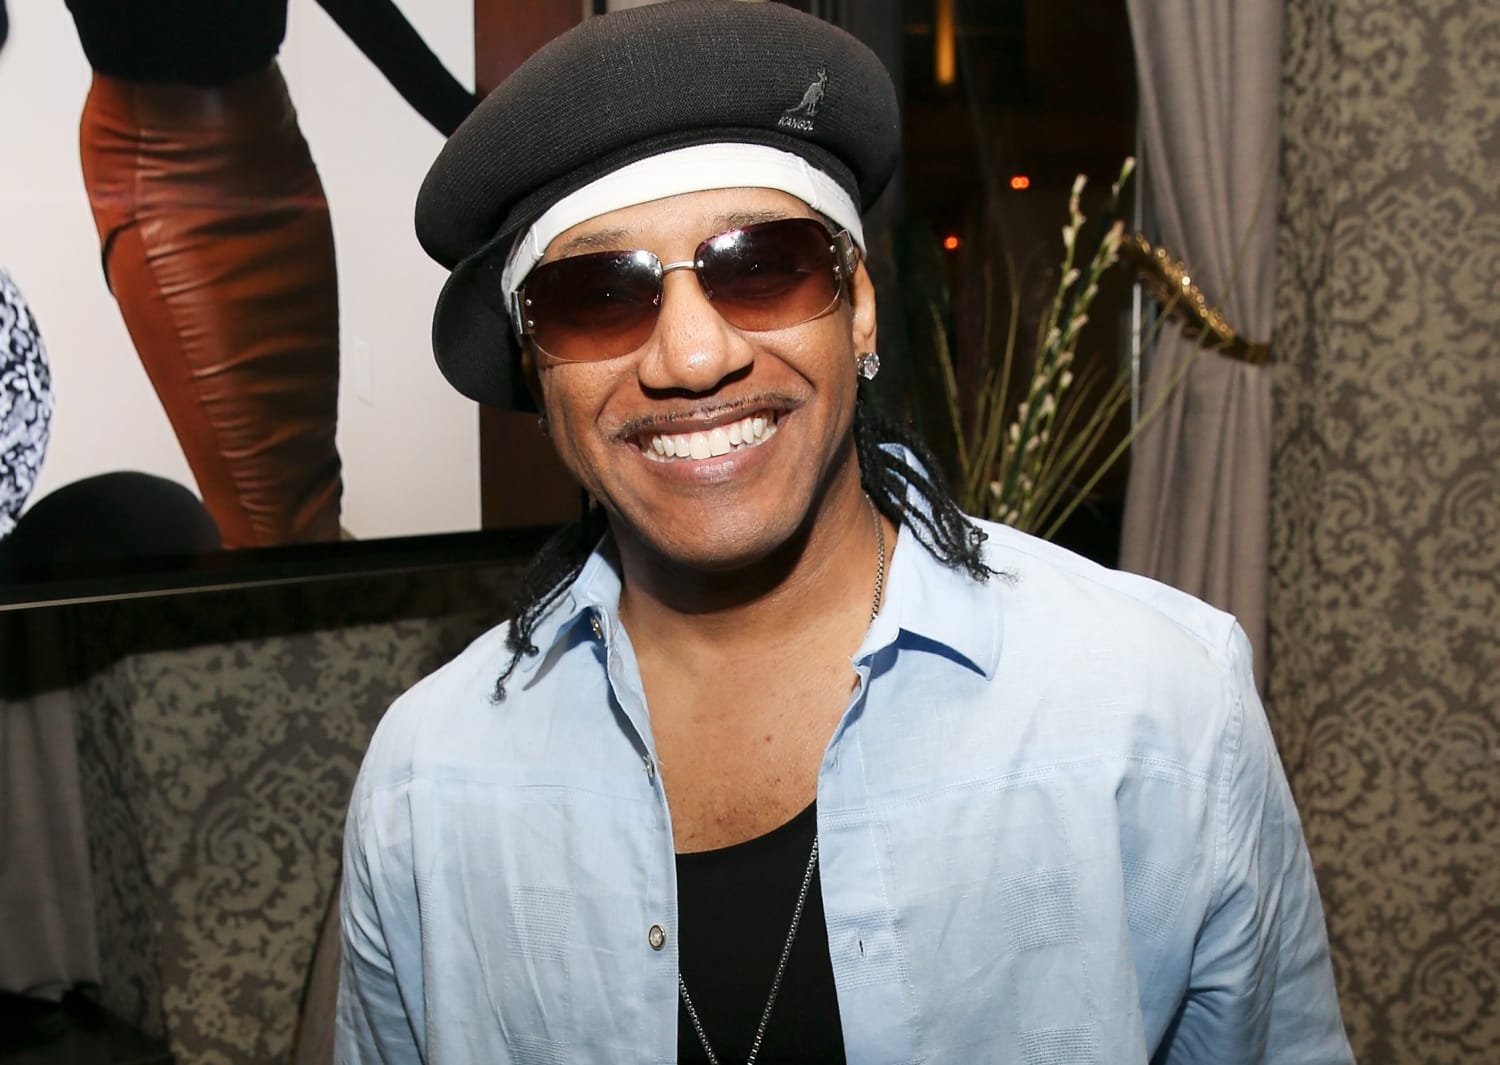 Rapper Kangol Kid dies at 55 after battle with cancer